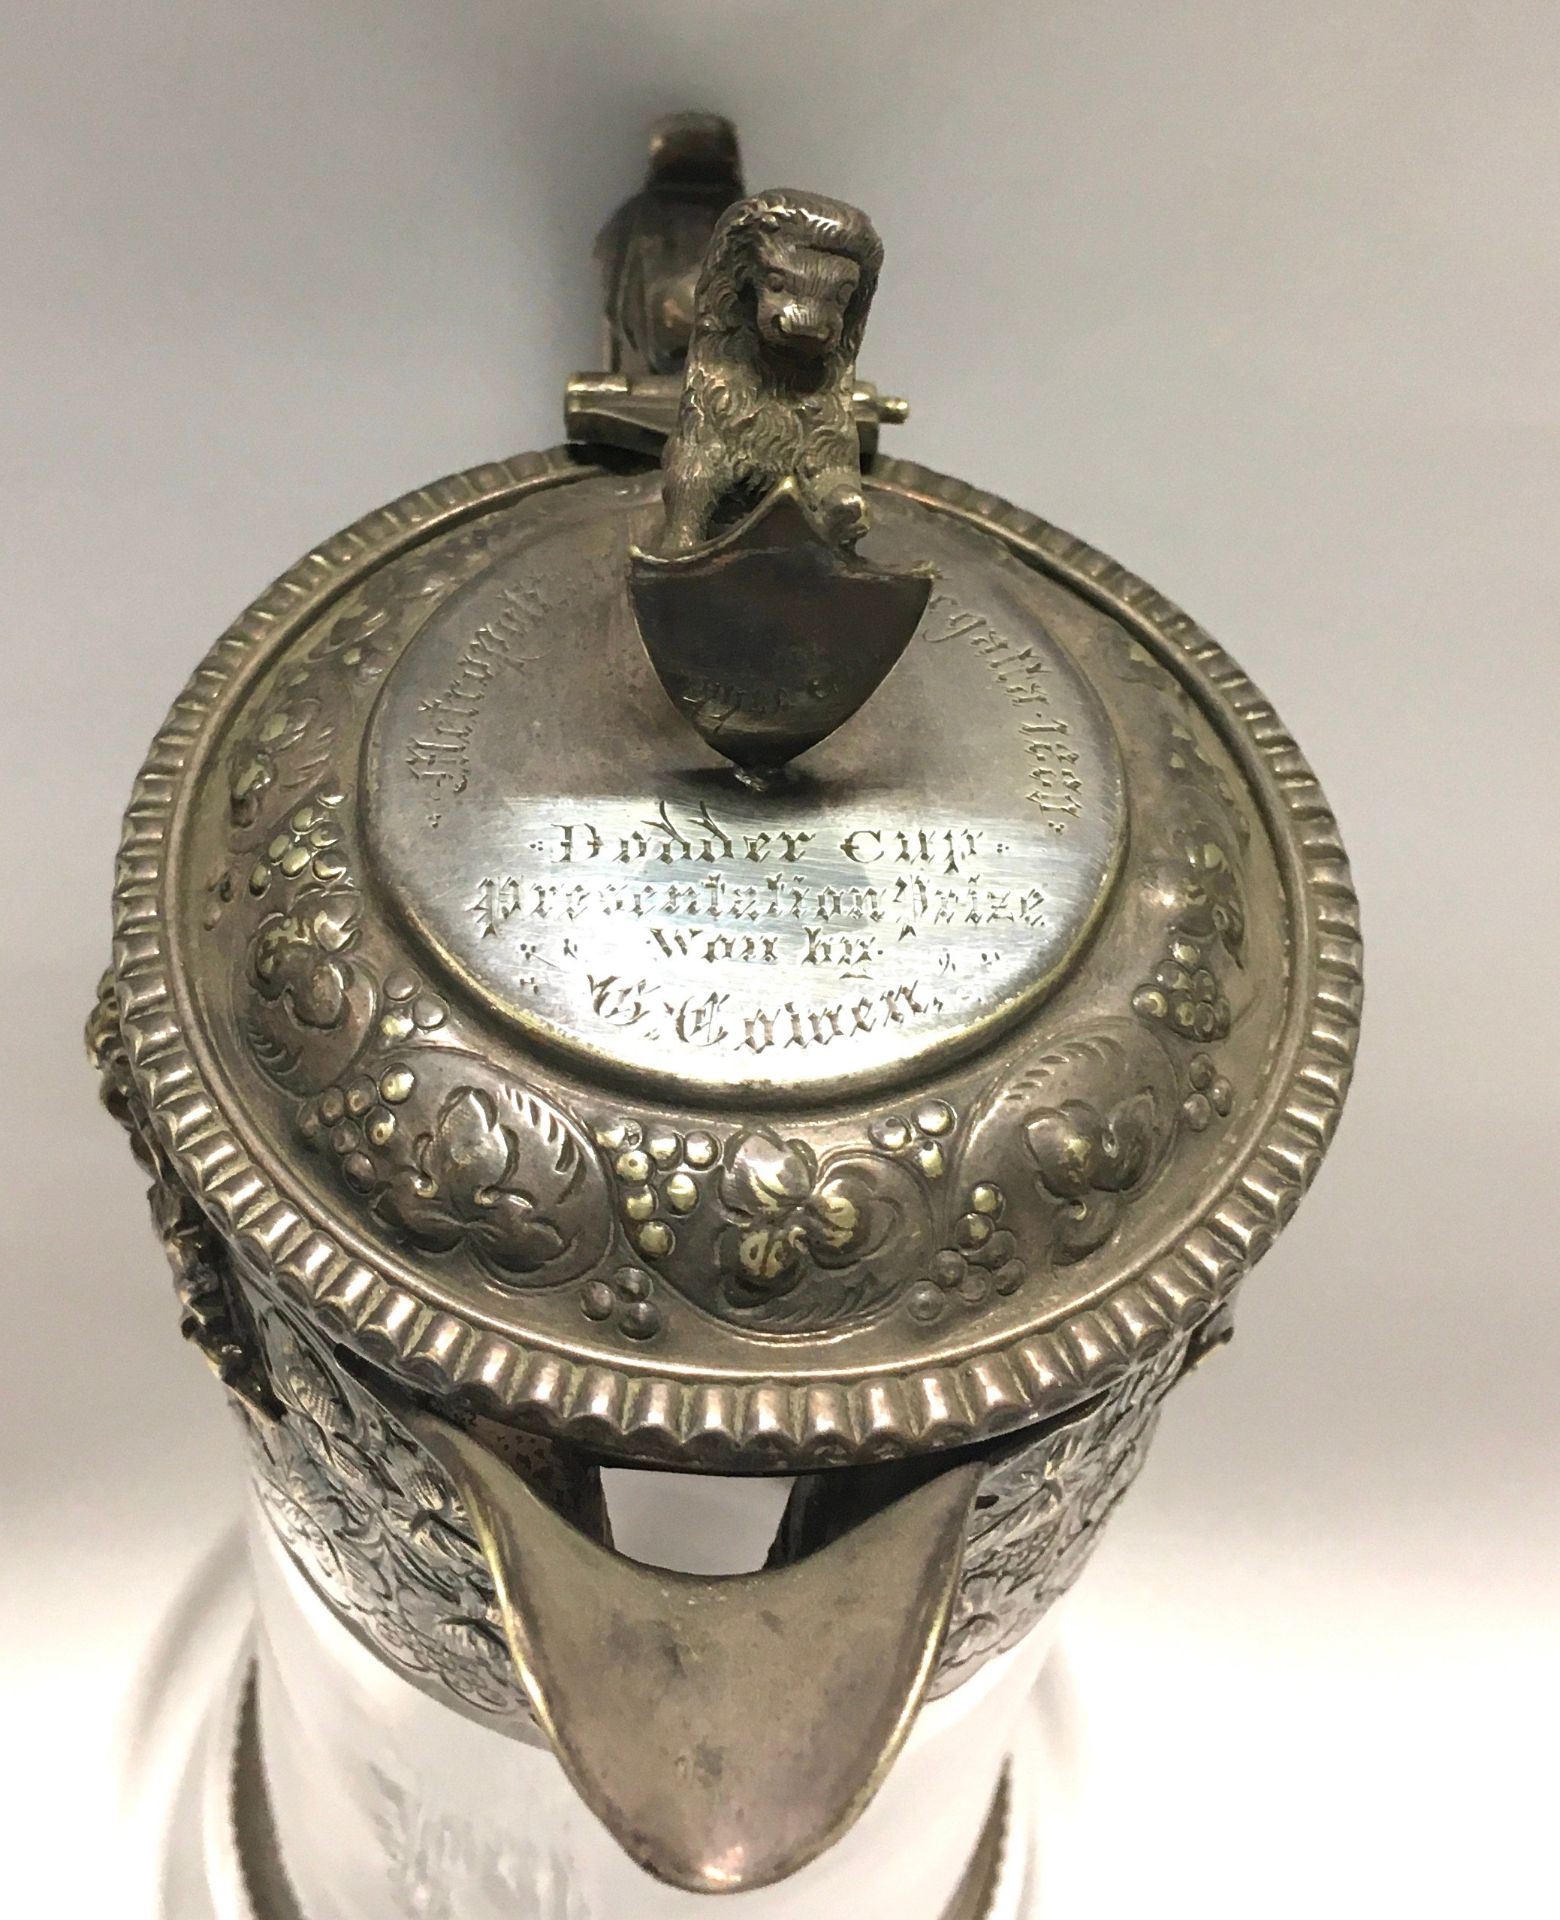 Vintage Claret jug with embossed decoration and Lion finial set as a trophy dated 1880 - Image 4 of 5